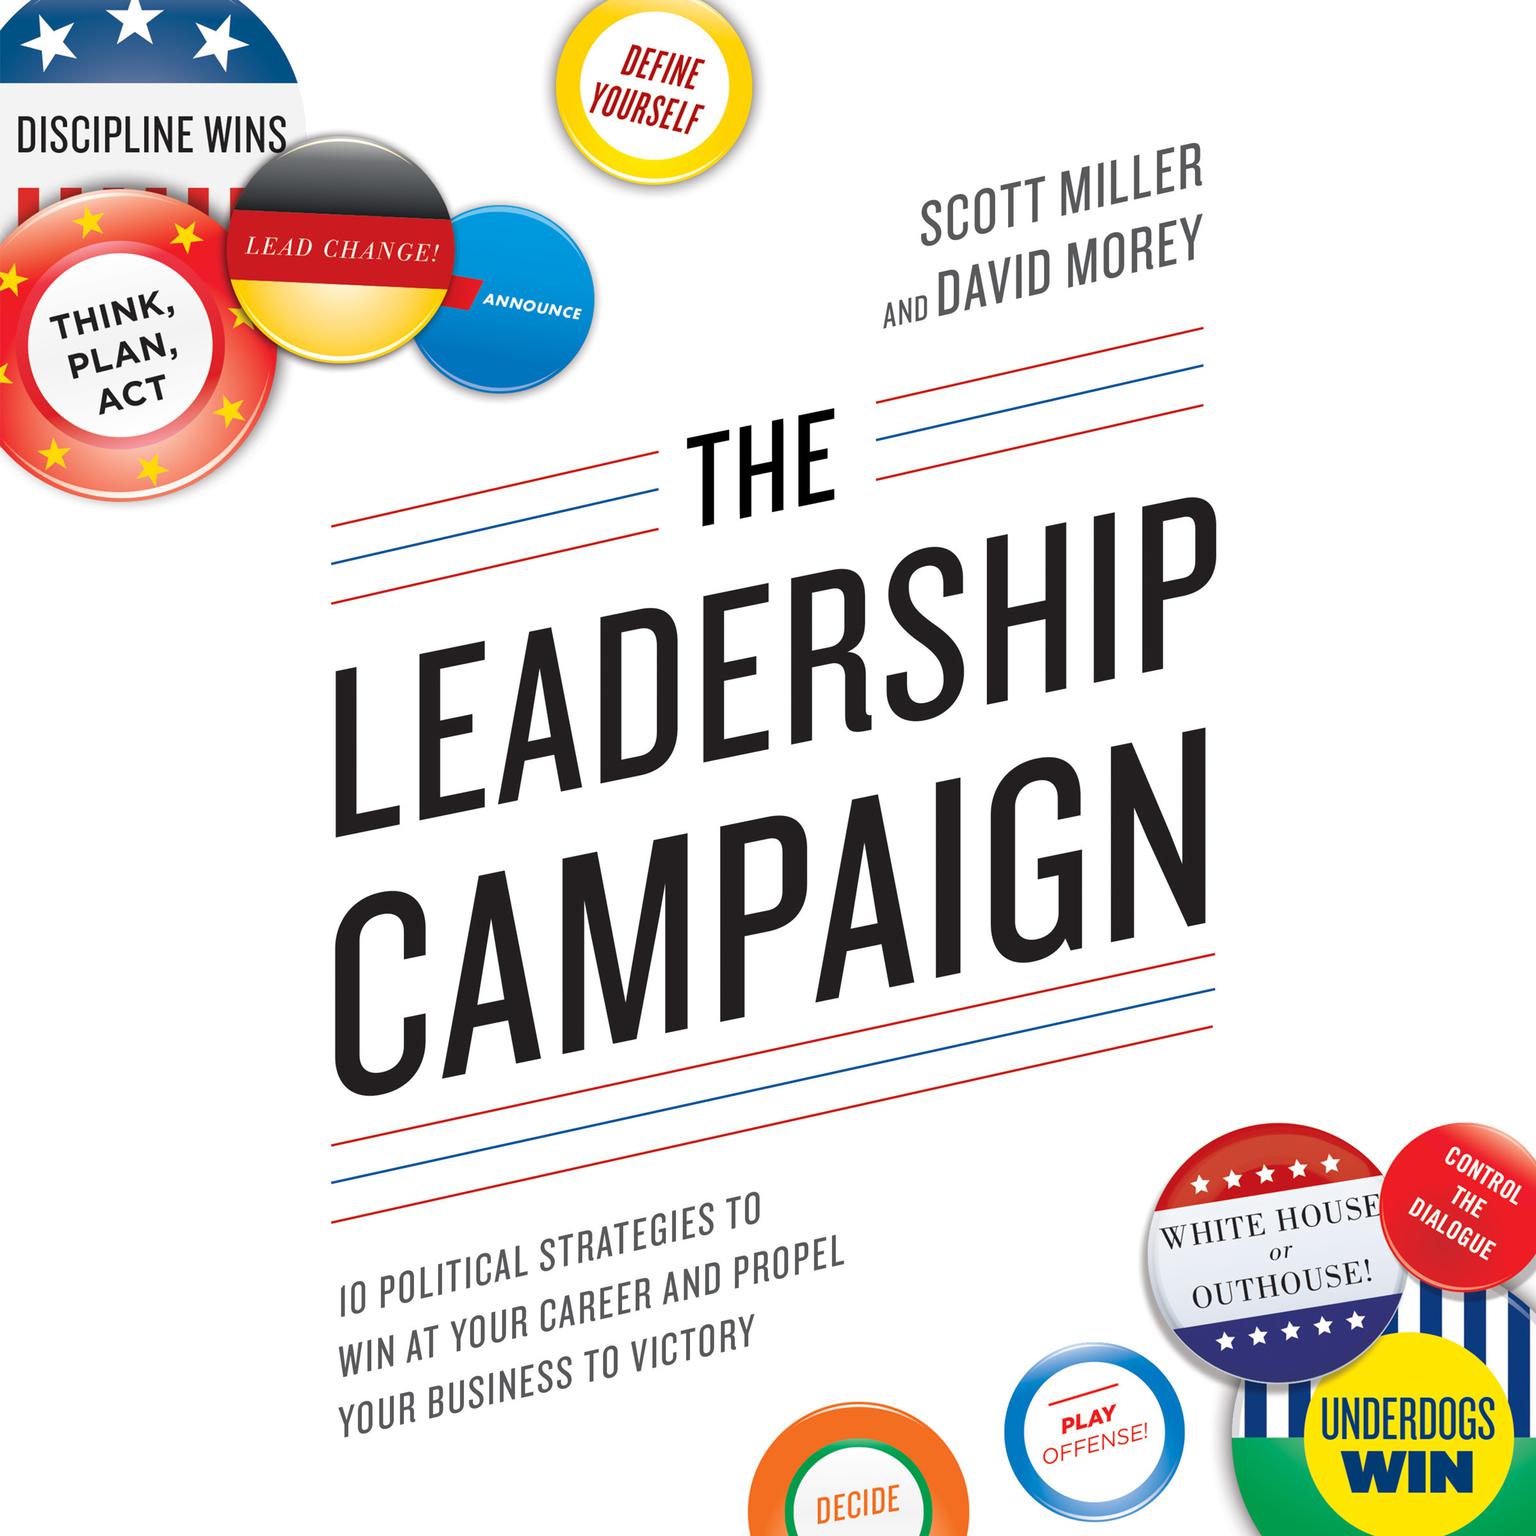 The Leadership Campaign: 10 Political Strategies to Win at Your Career and Propel Your Business to Victory Audiobook, by Scott Miller